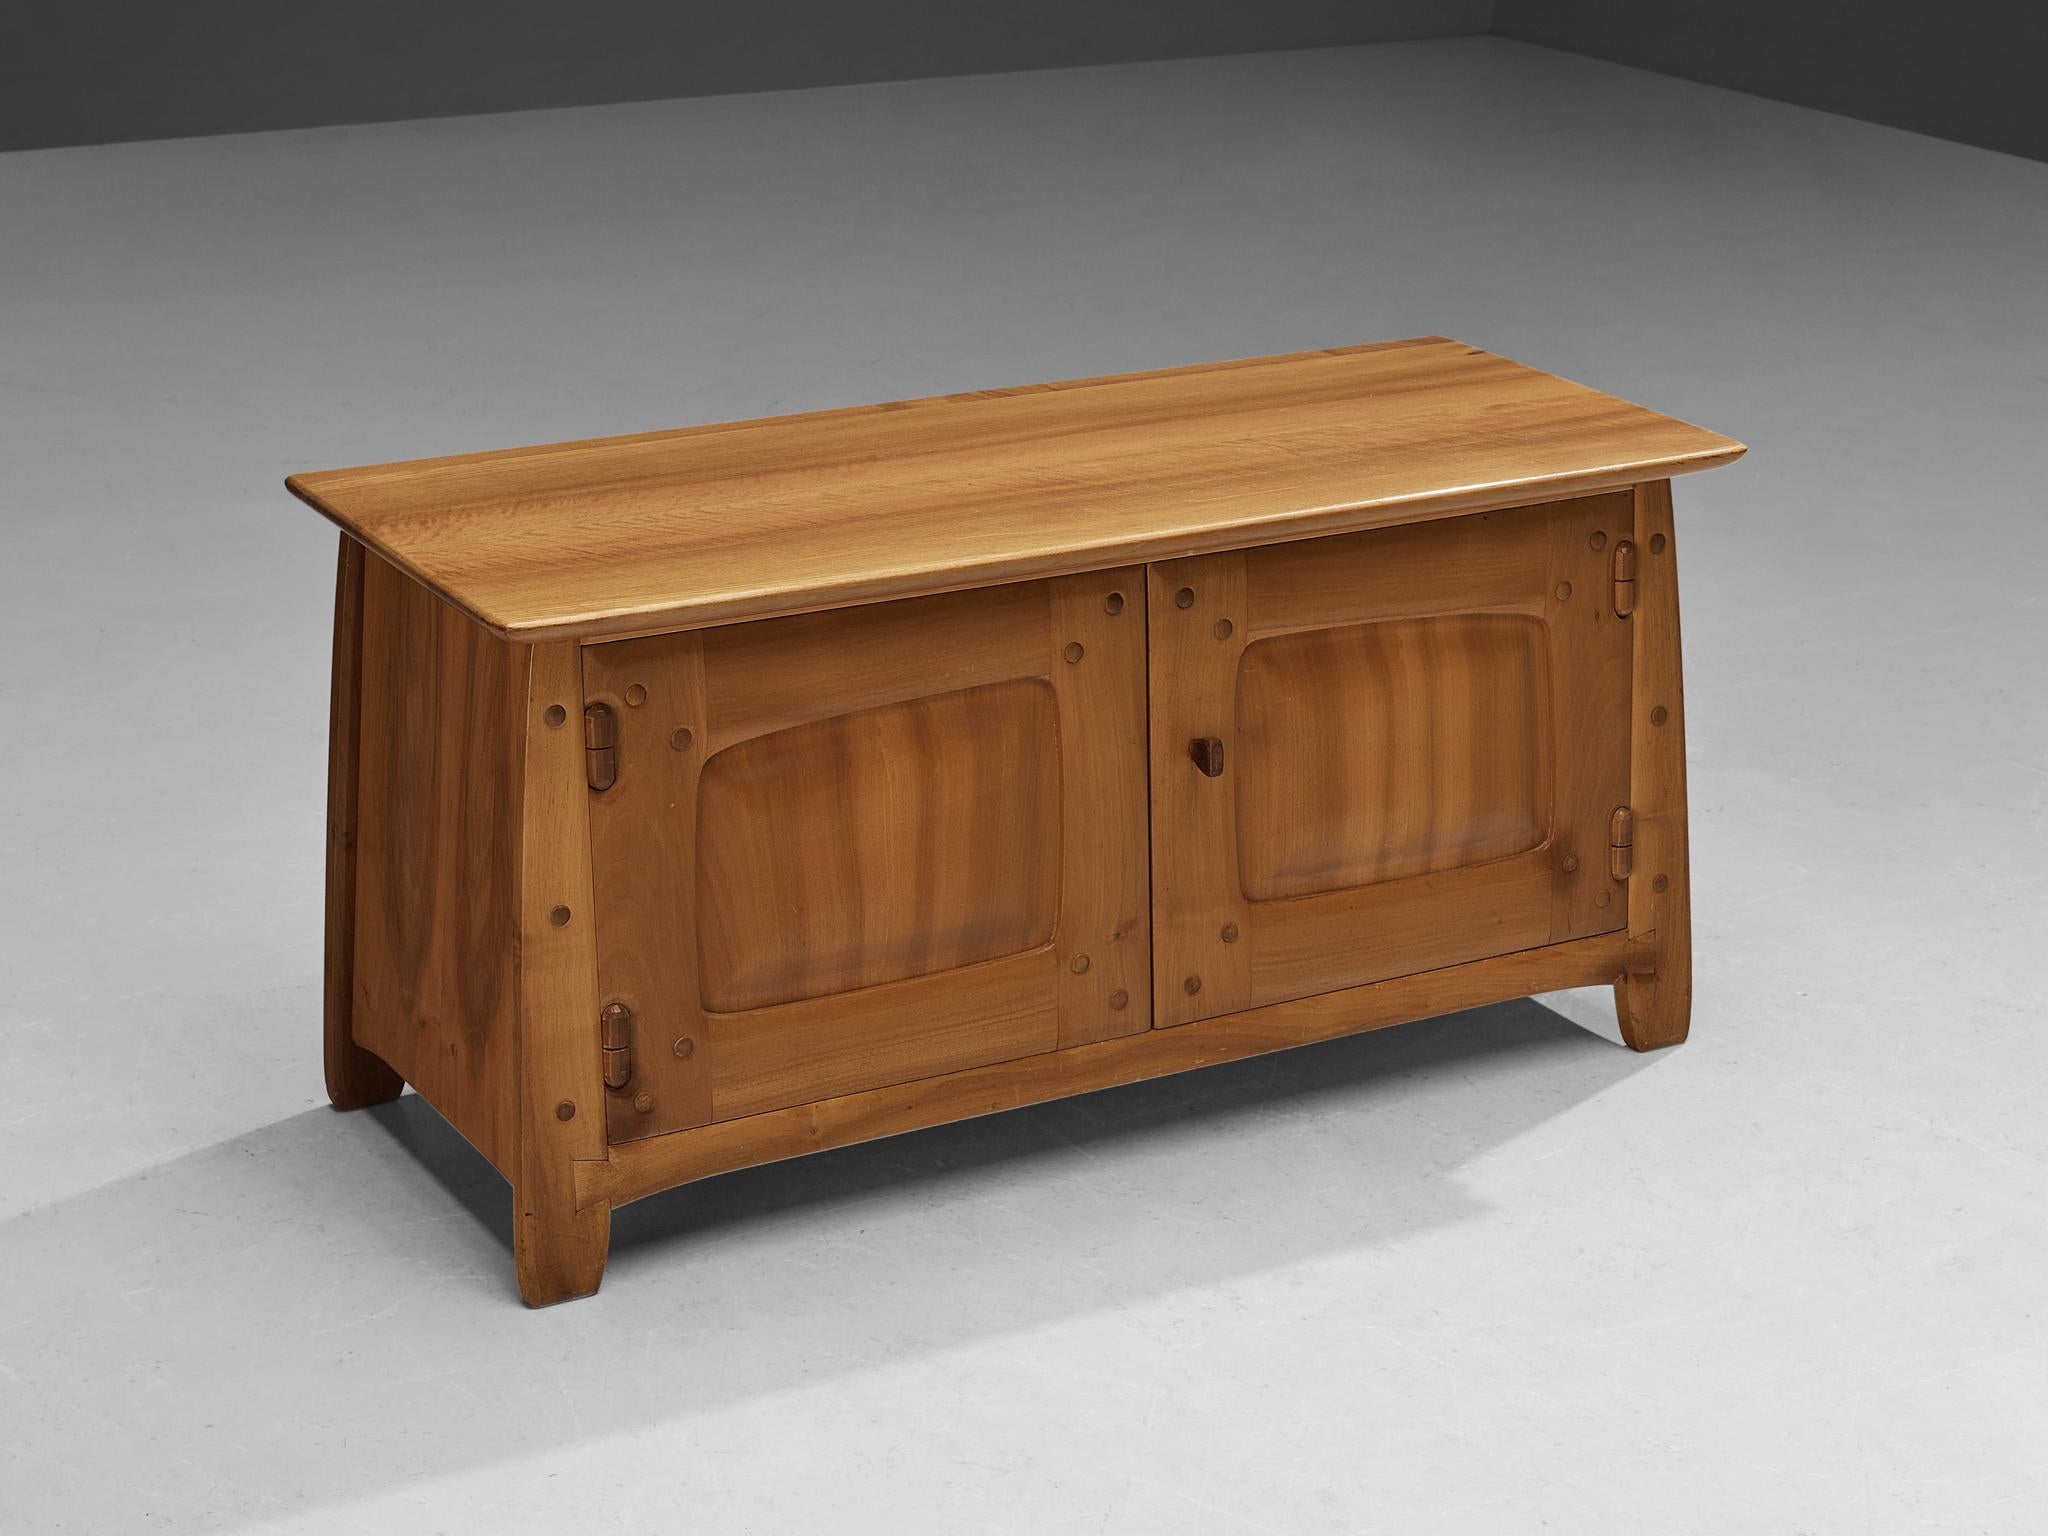 Franz Xaver Sproll, sideboard, walnut, Switzerland, 1960s 

Swiss furniture maker Franz Xaver Sproll is known for high-quality, hand-crafted furniture in solid wood, featuring characteristic details. The viewer can follow the lines of the craftsman